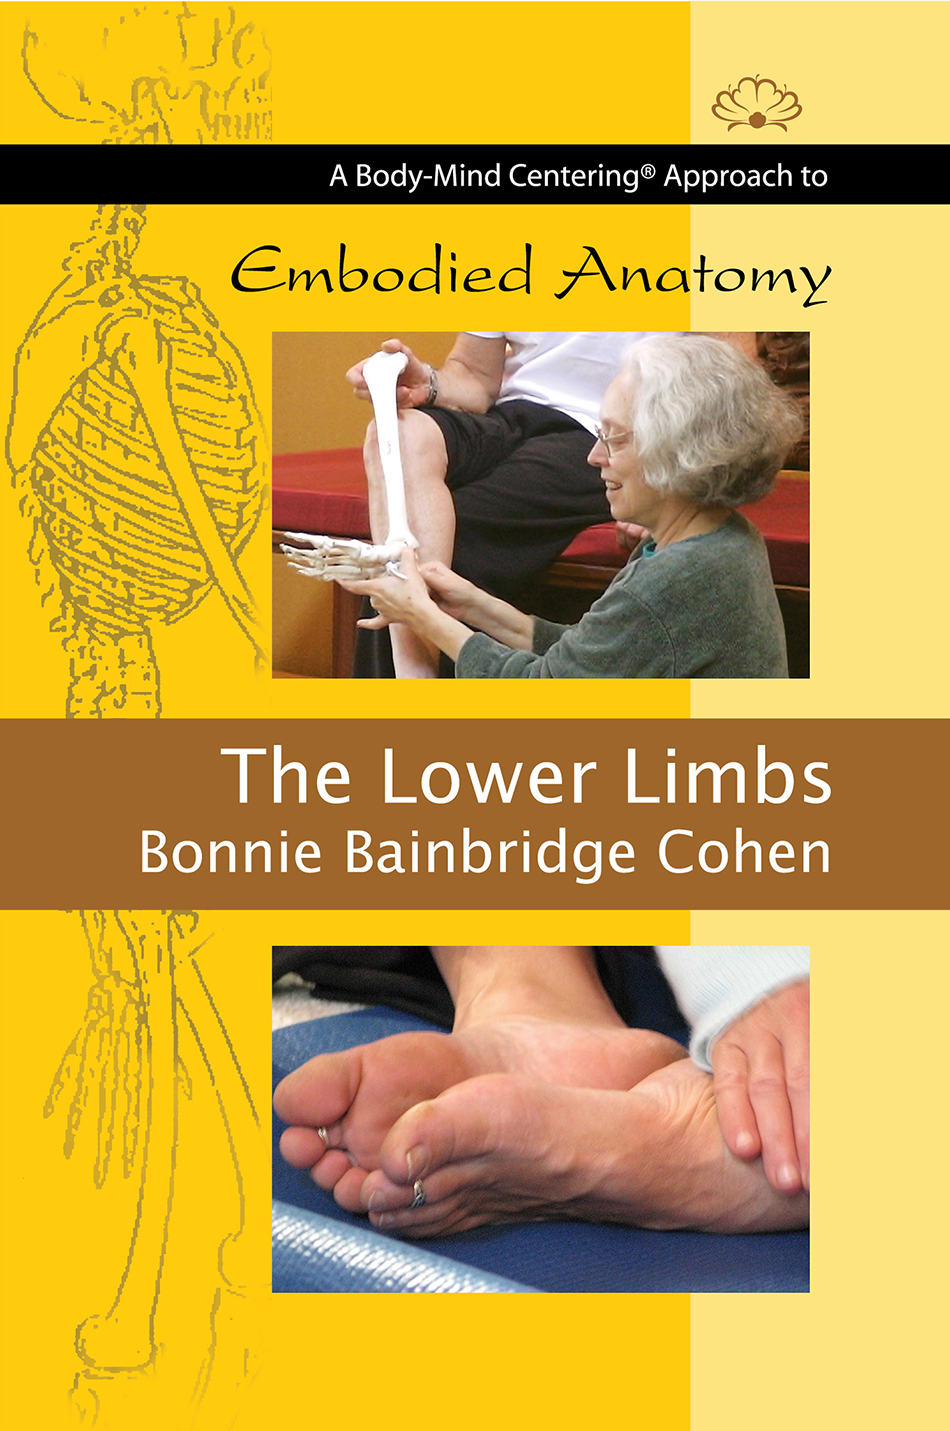 The Lower Limbs - Body-Mind Centering®